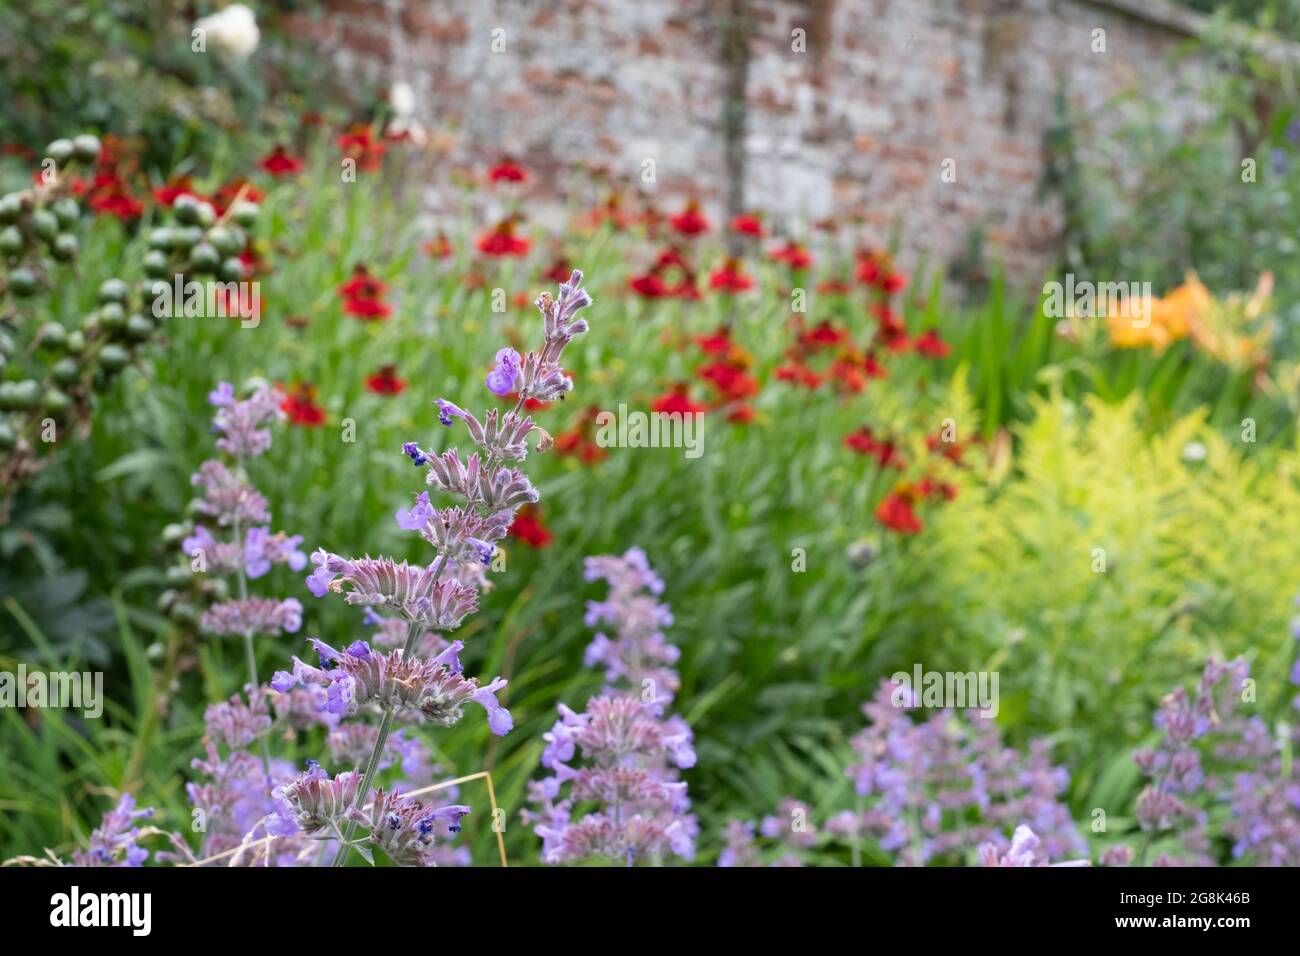 Colourful mixed herbaceous border at Oxburgh Hall, Norfolk UK. By the path are clumps of purple Catmint, also known as Nepeta Racemosa or Walker's Low Stock Photo